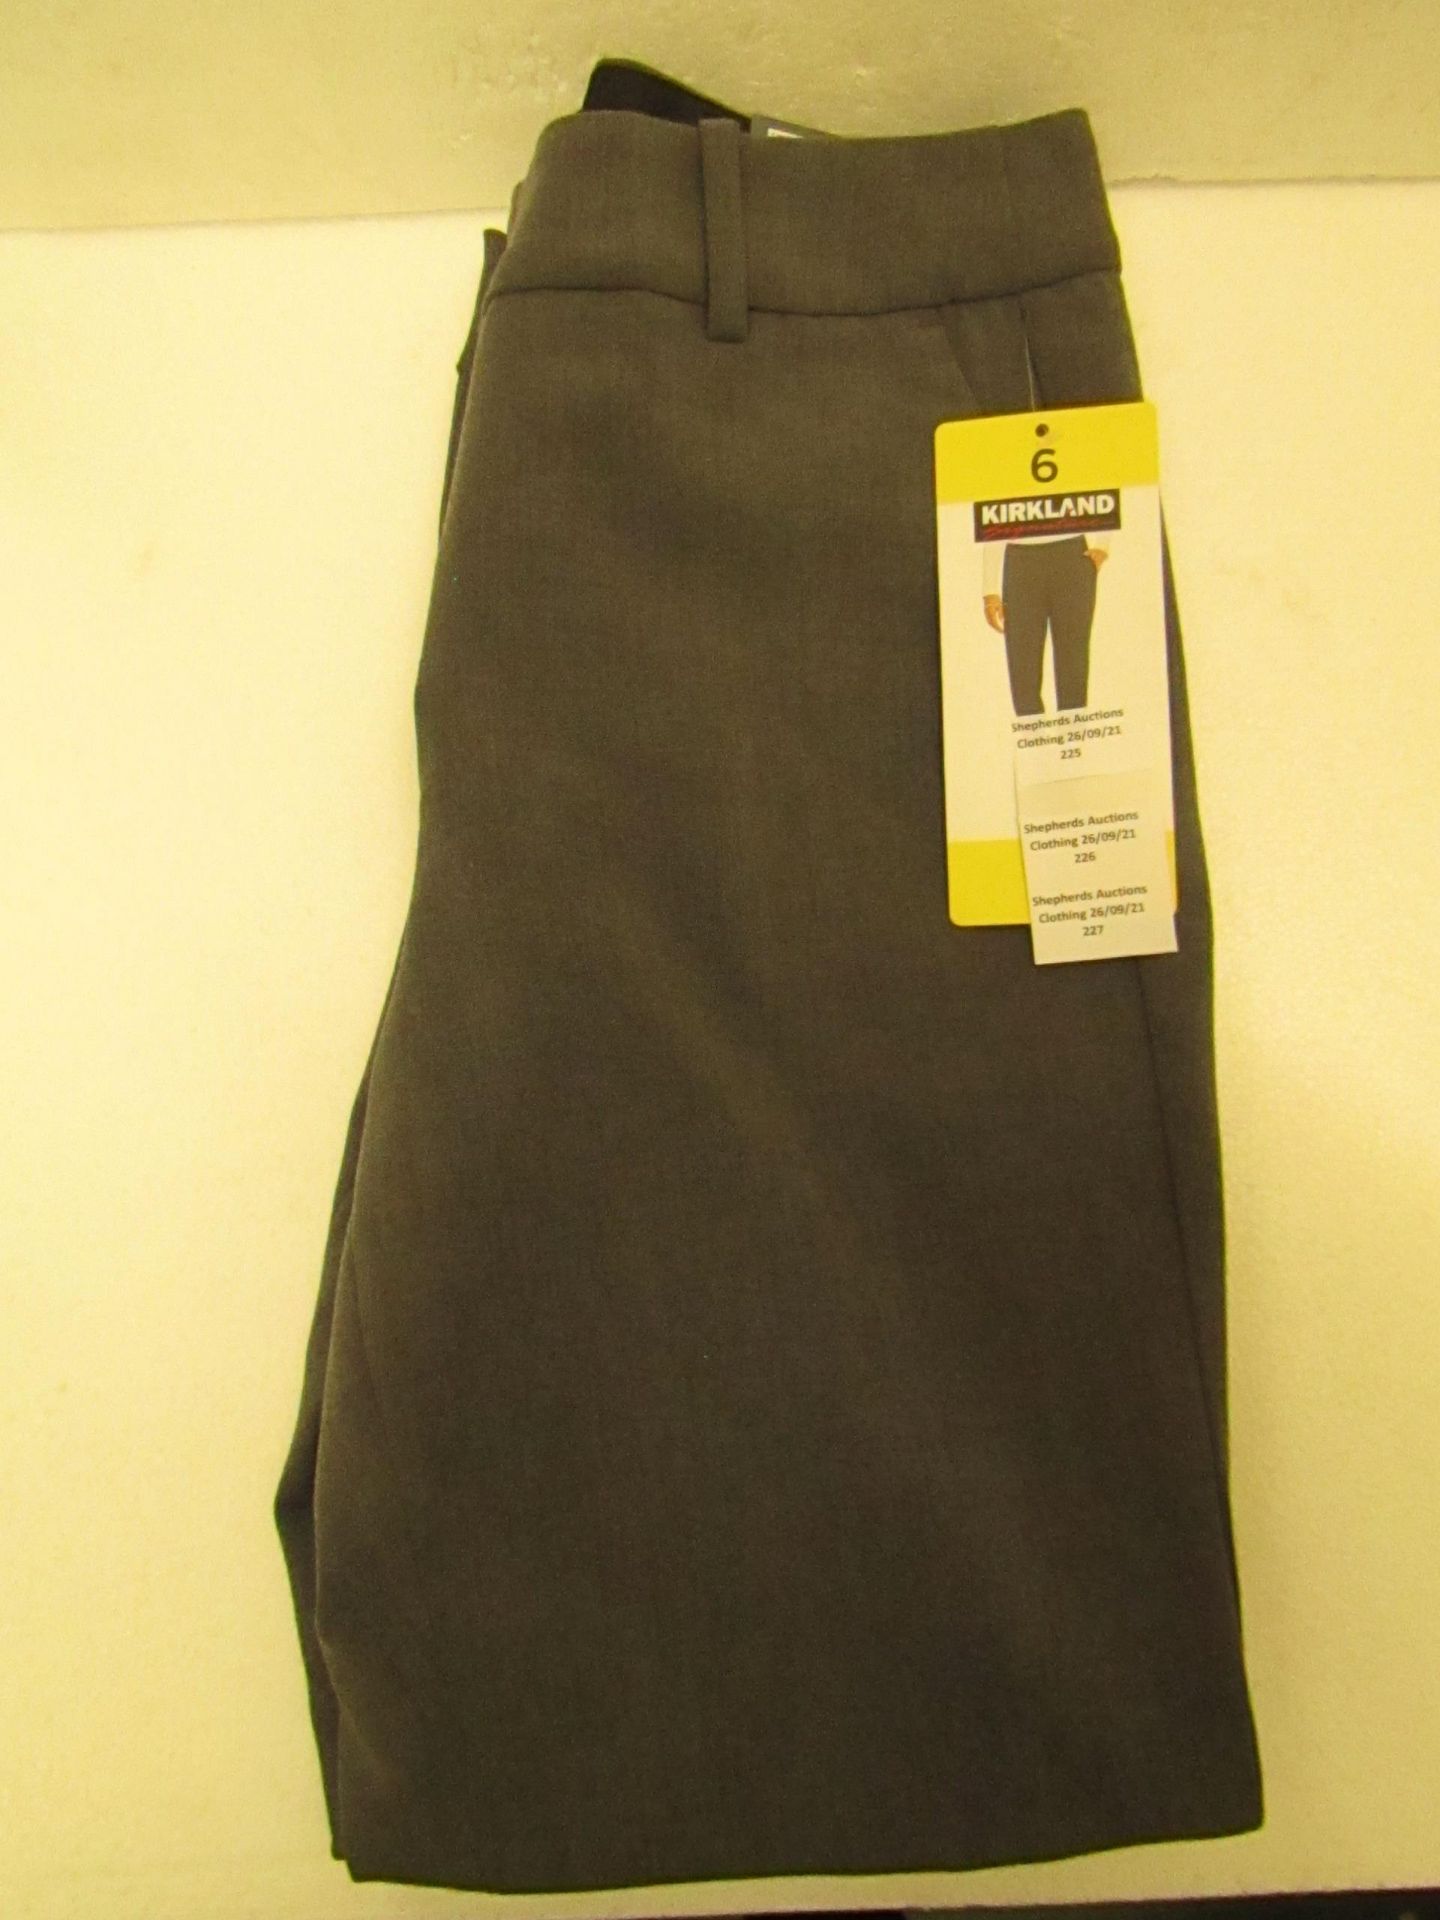 1X Kirkland Signature Ladies Pants - Size 6 - Grey - New with tags